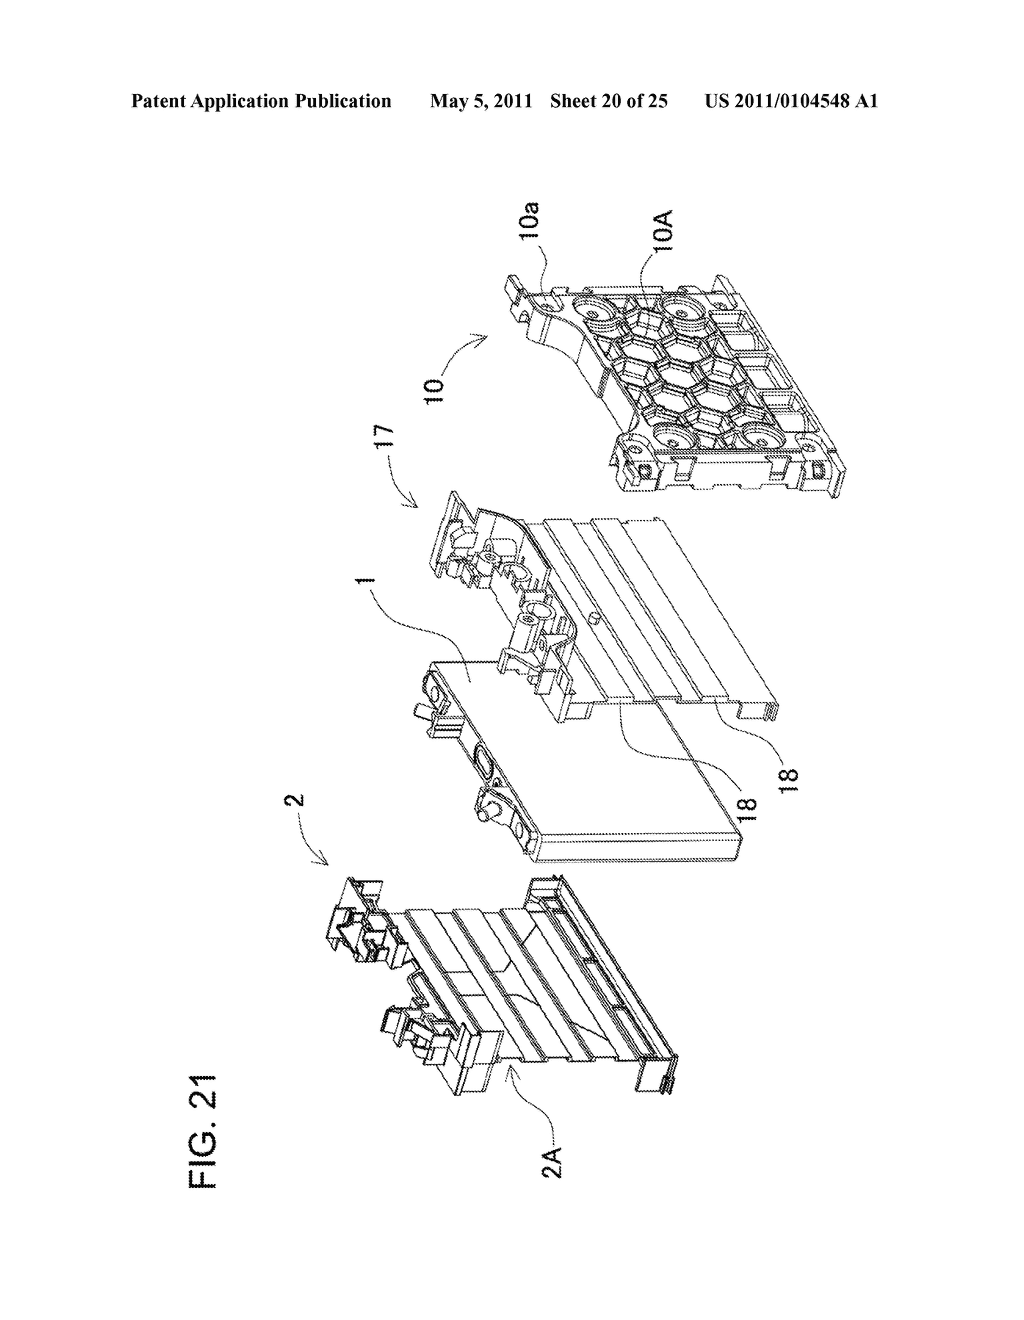 POWER SUPPLY DEVICE INCLUDING A PLURALITY OF BATTERY CELLS ARRANGED SIDE BY SIDE - diagram, schematic, and image 21